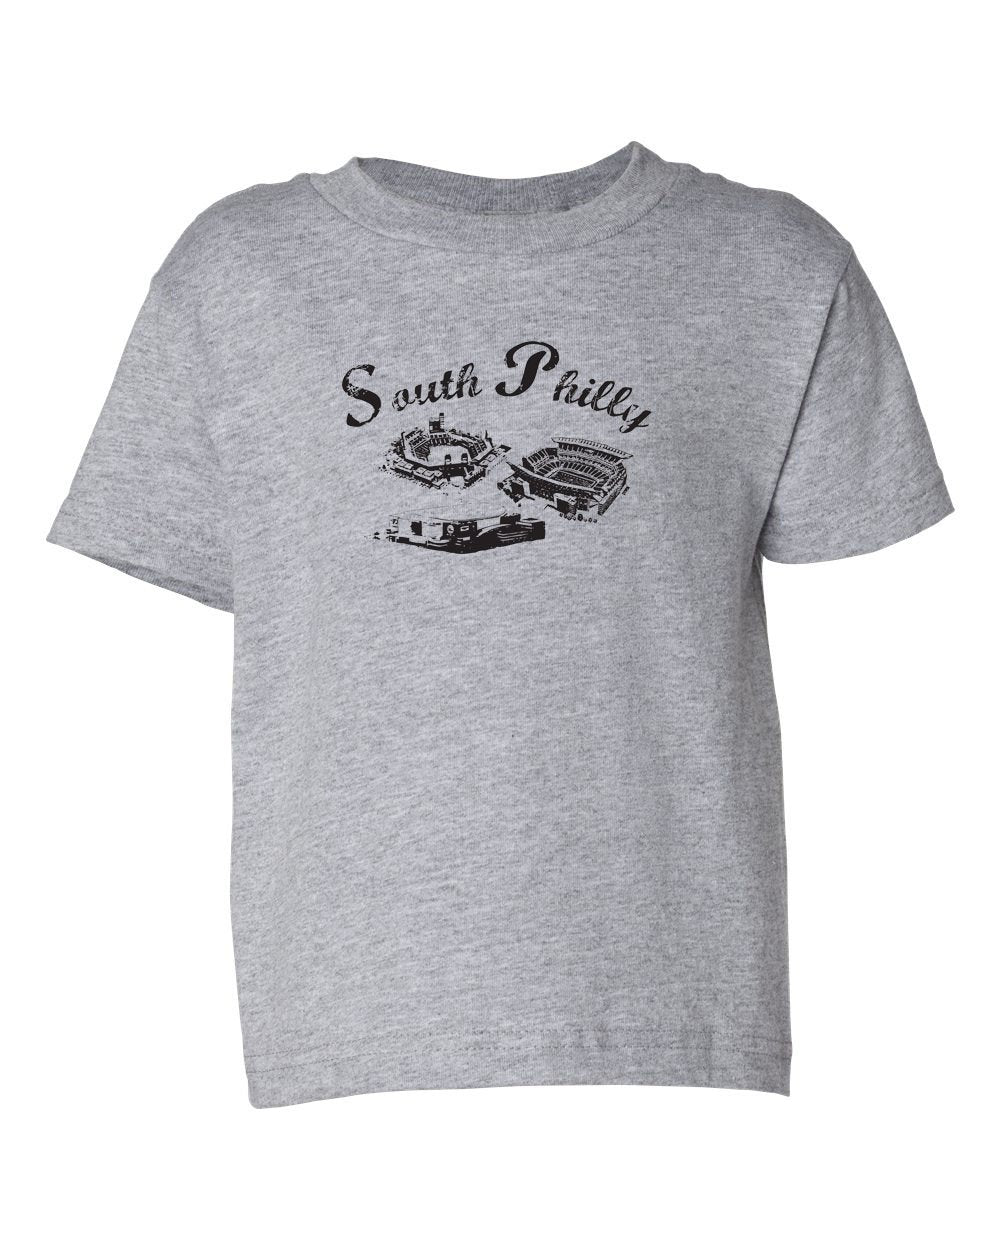 South Philly TODDLER T-Shirt